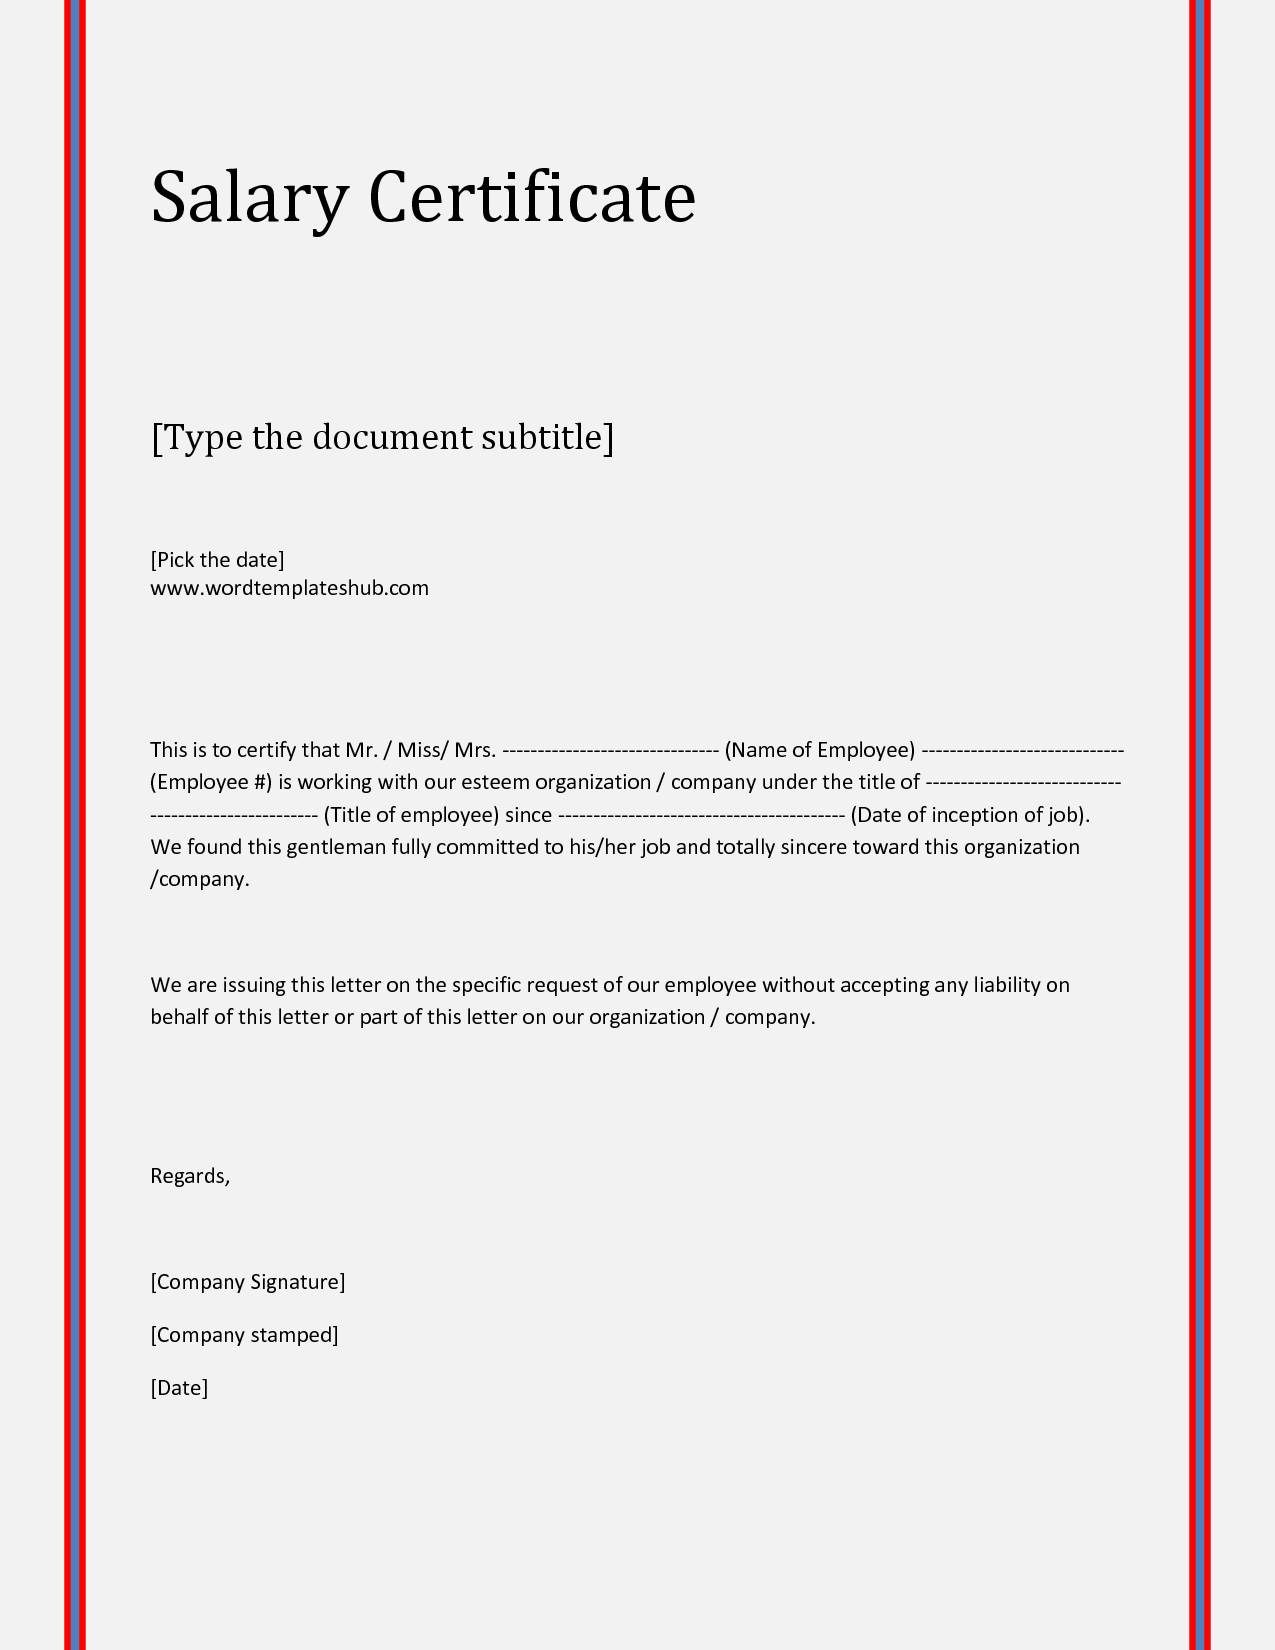 Request Letter For Certificate Employment Nurses Cover Proof With Sample Certificate Employment Template